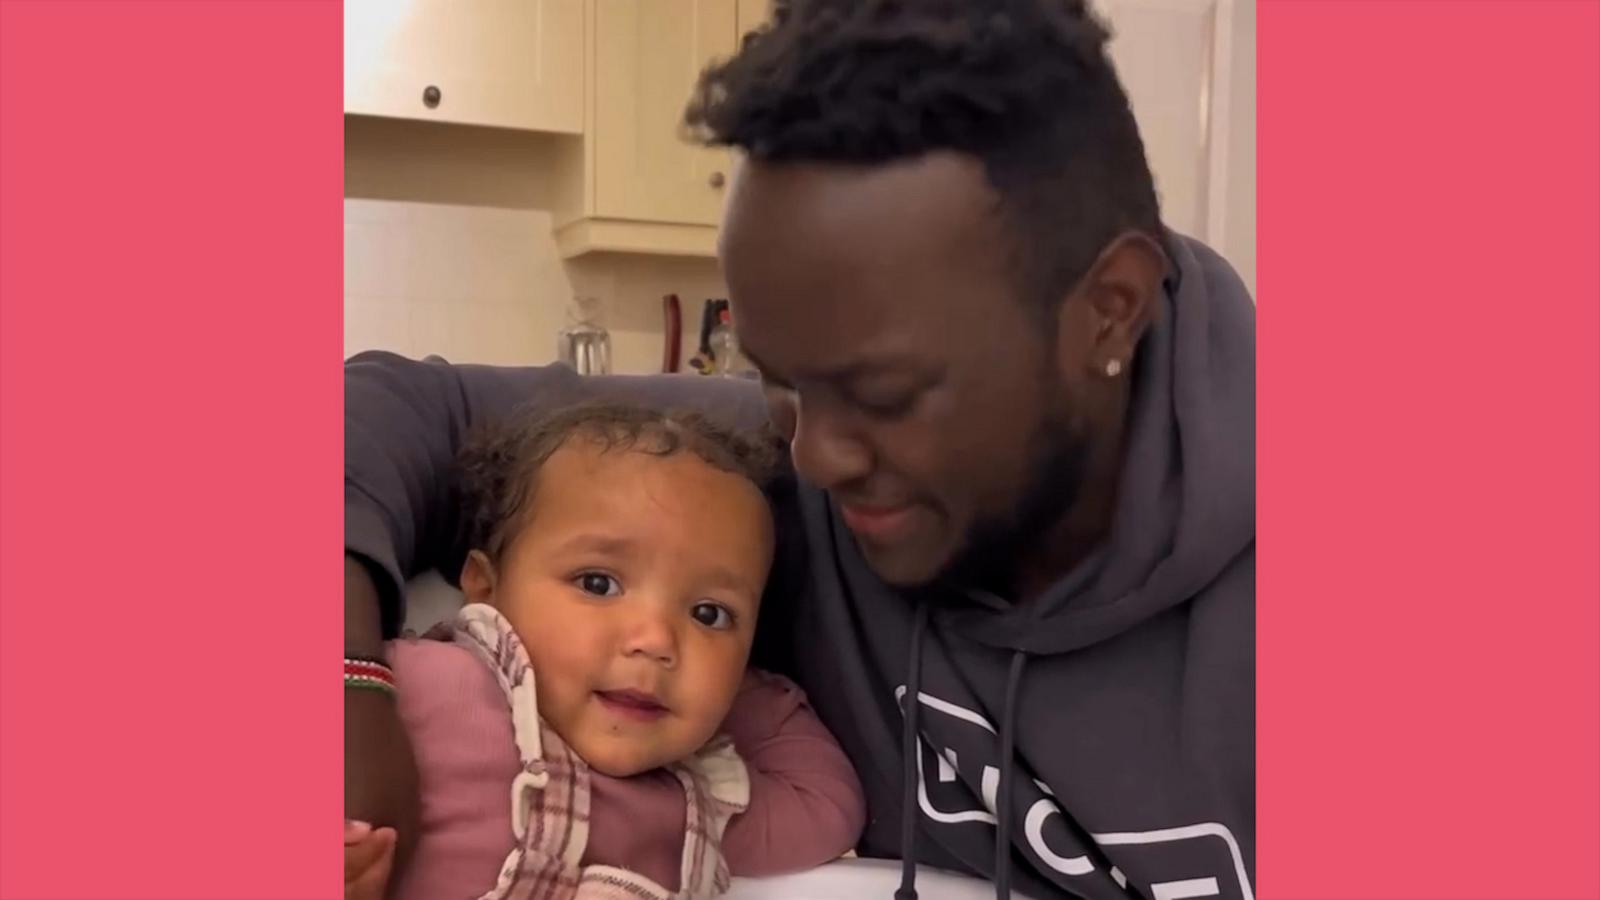 VIDEO: Adorable baby doesn't want to share her dad